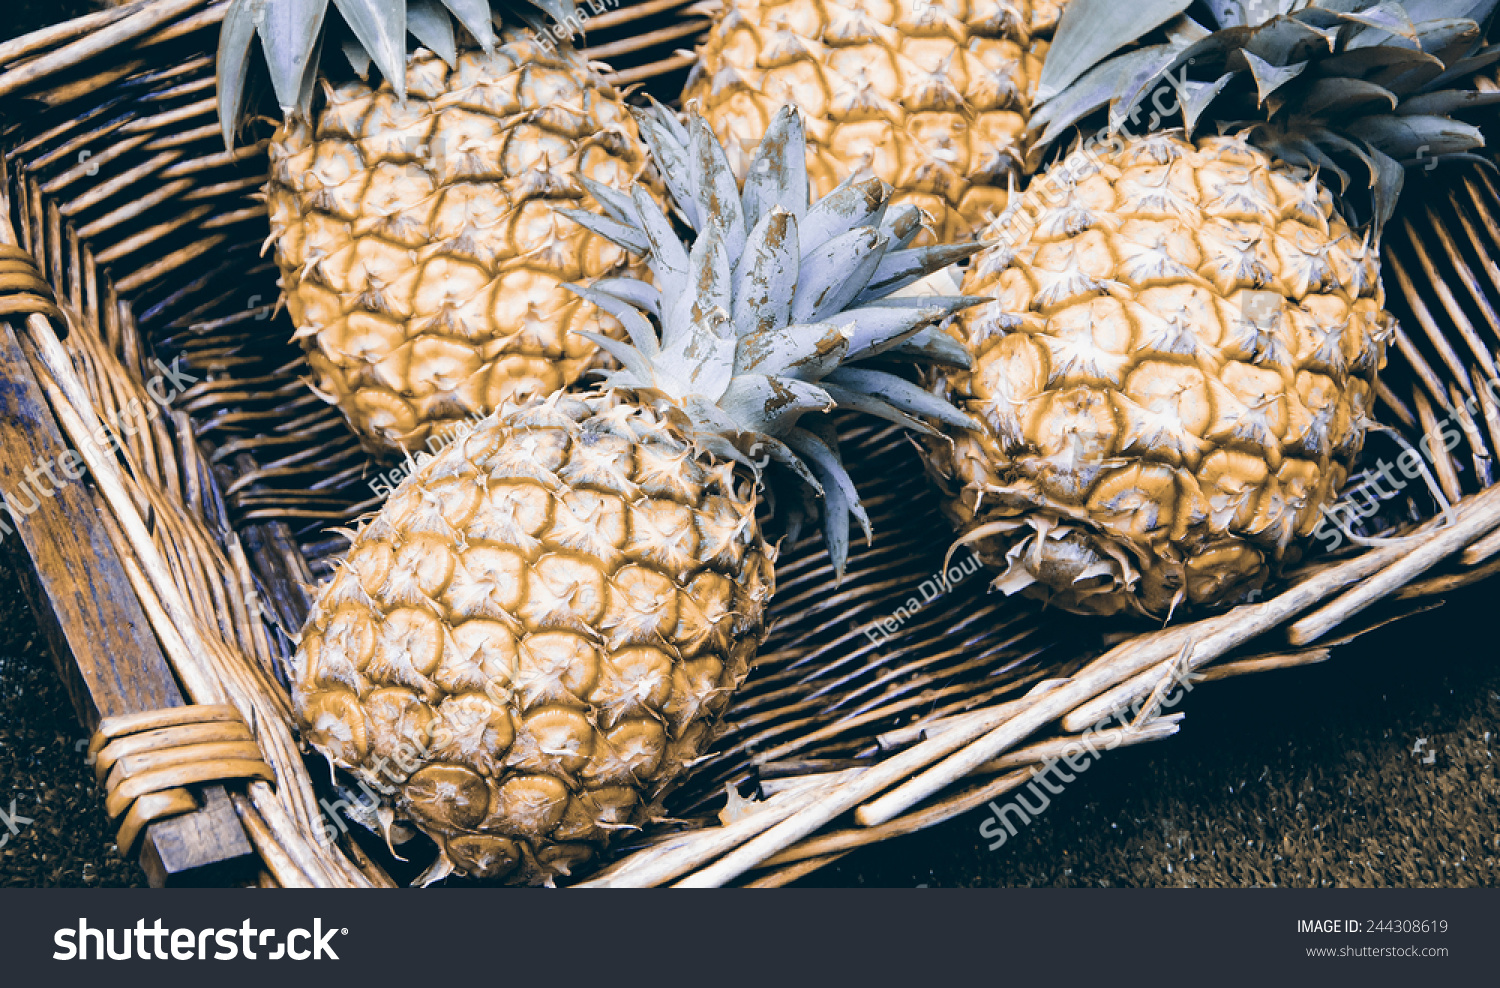 Pineapples in wicker basket at organic farmers market in Paris (France). Aged photo. #244308619